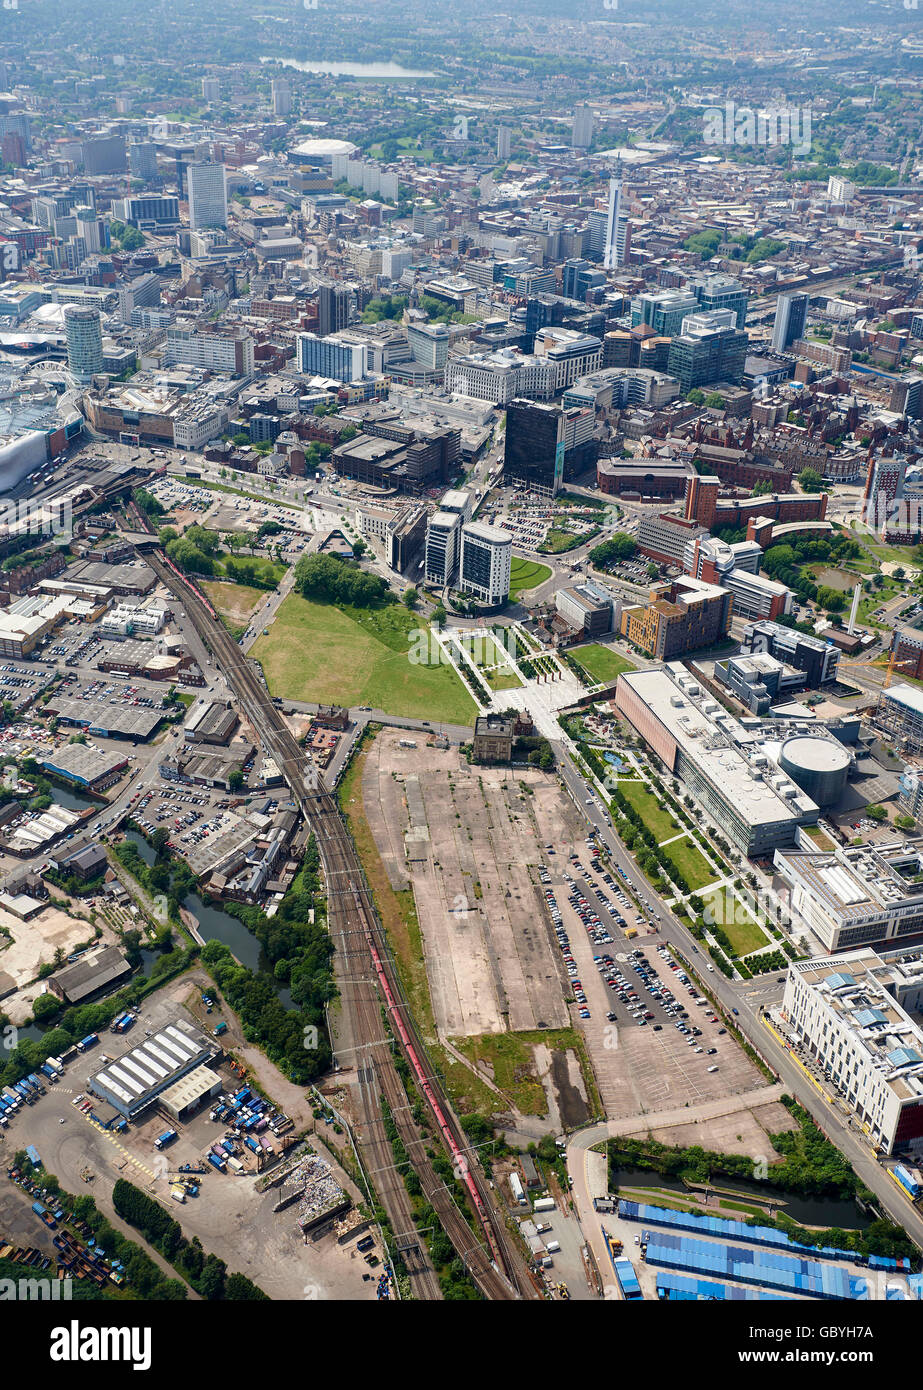 An aerial view of Birmingham City Centre, West Midlands, UK, with the proposed Curzon Street HS2 terminus site foreground Stock Photo